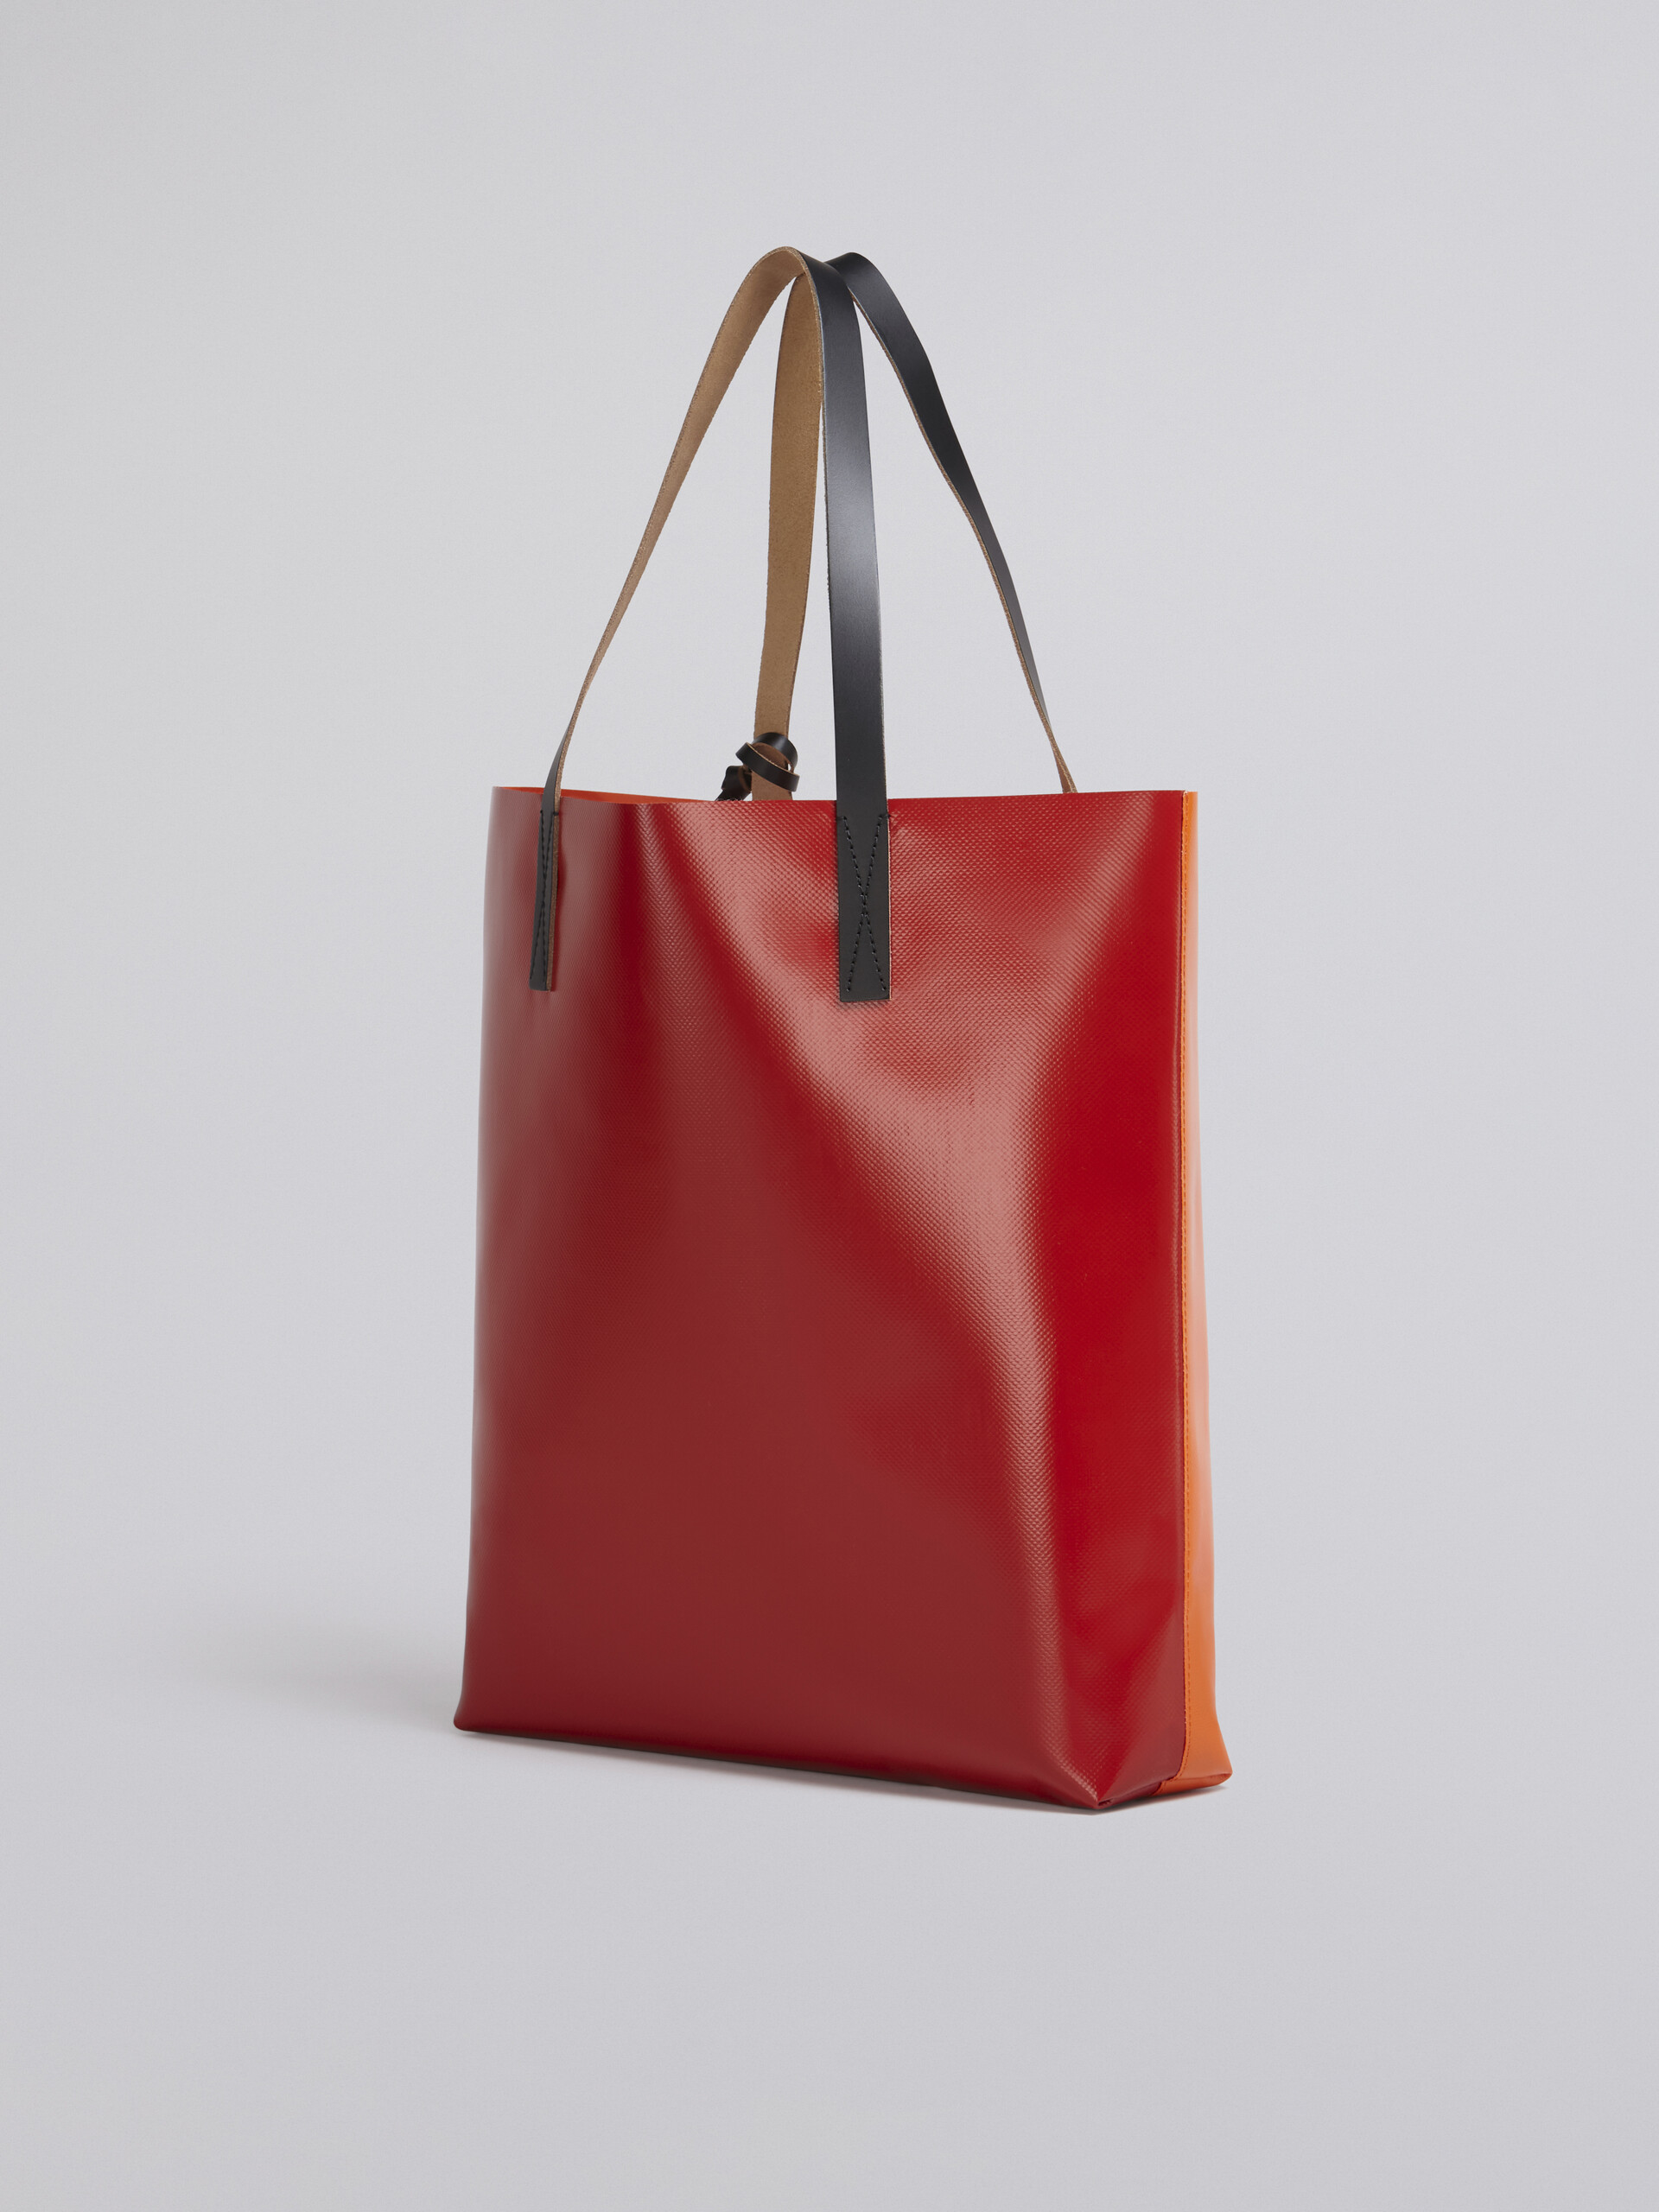 Red and orange TRIBECA shopping bag with Marni logo - Shopping Bags - Image 2